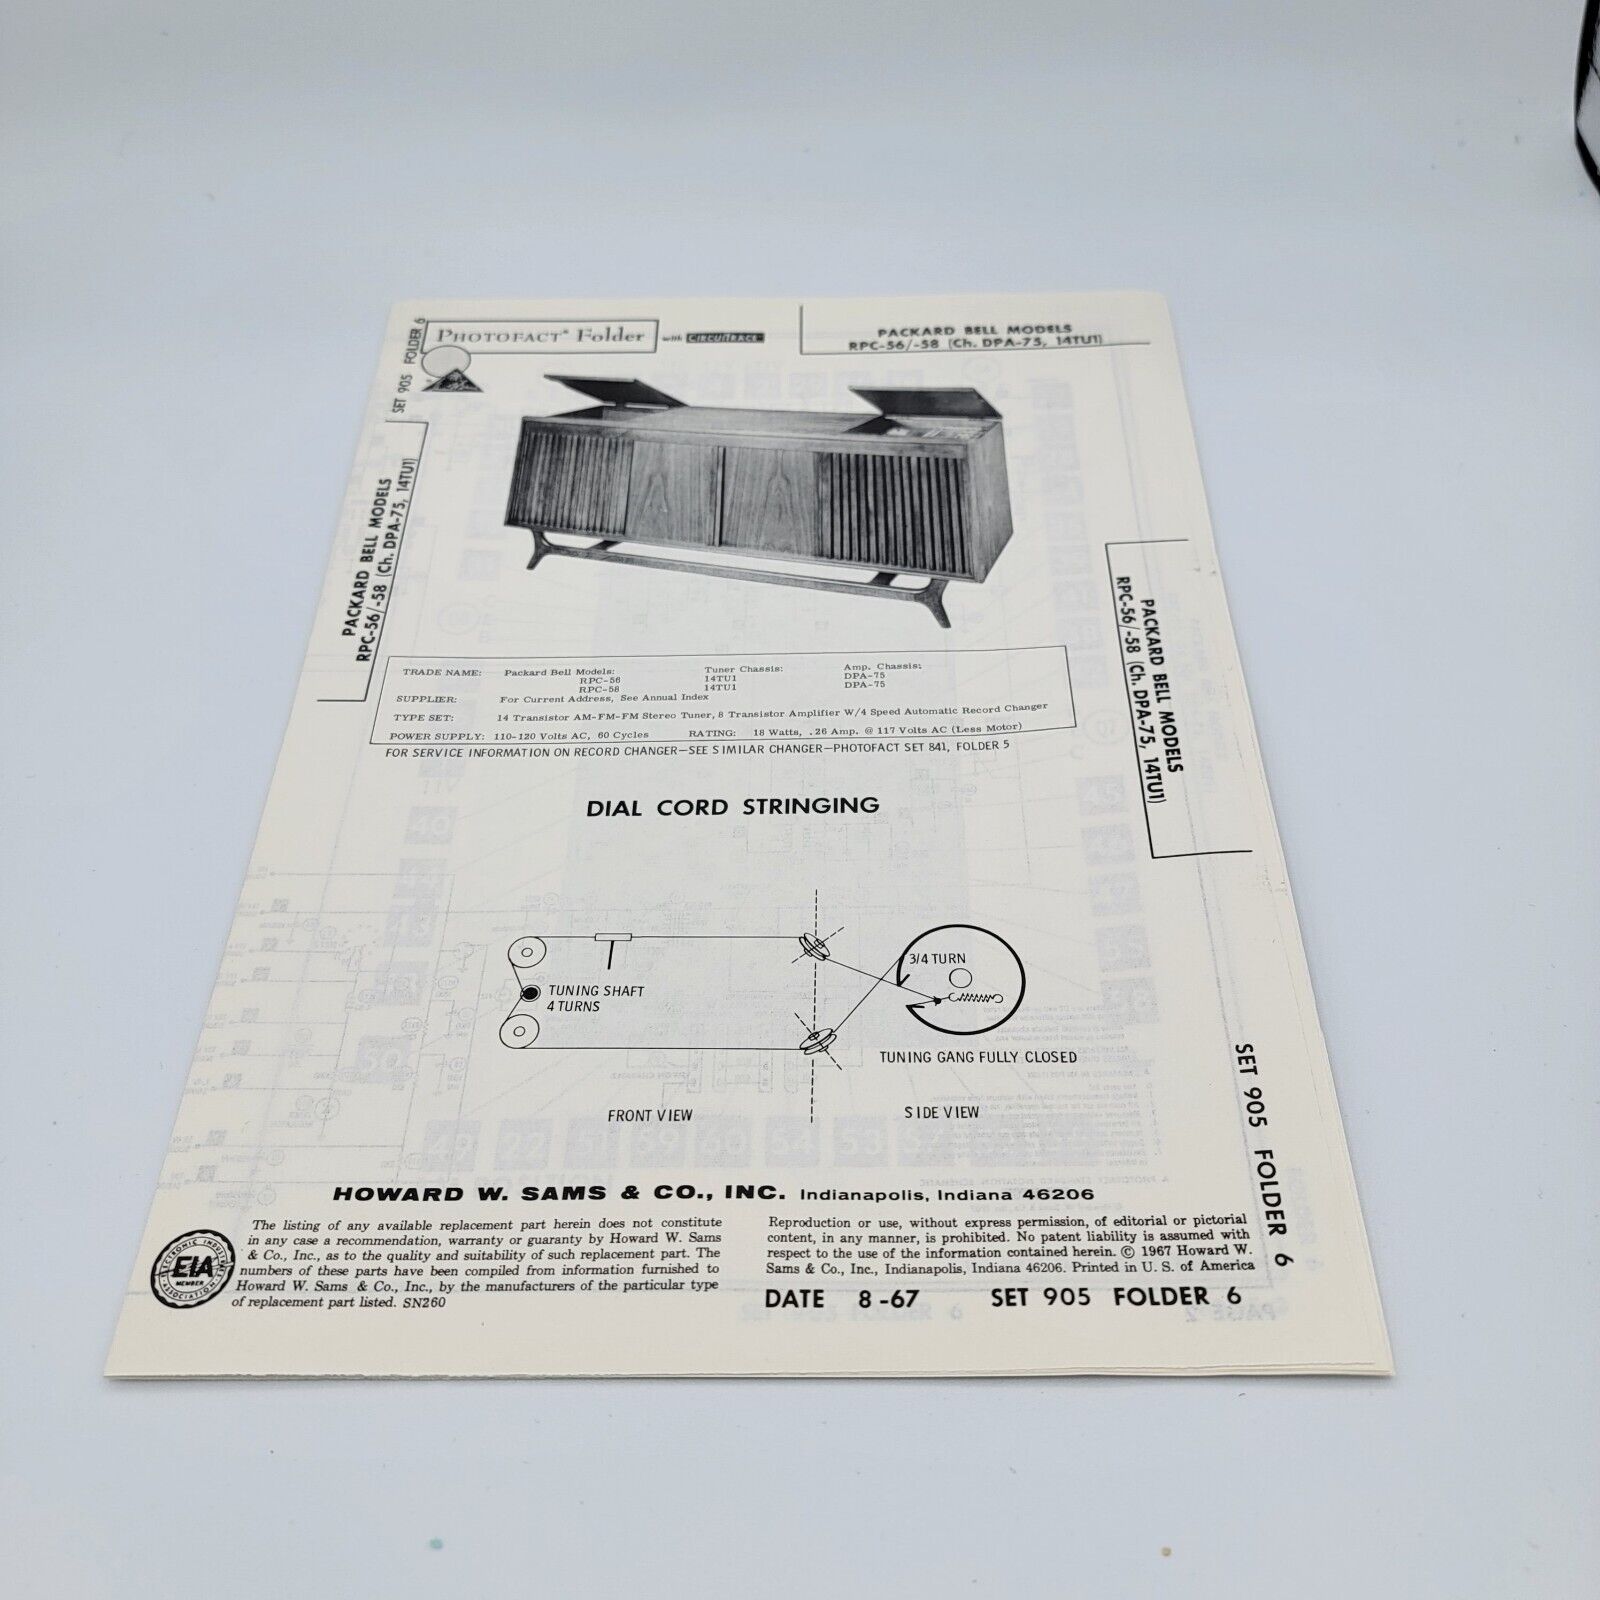 1967 PACKARD BELL RPC-56 -58 RADIO SERVICE MANUAL SCHEMATIC PHOTOFACT DPA-75